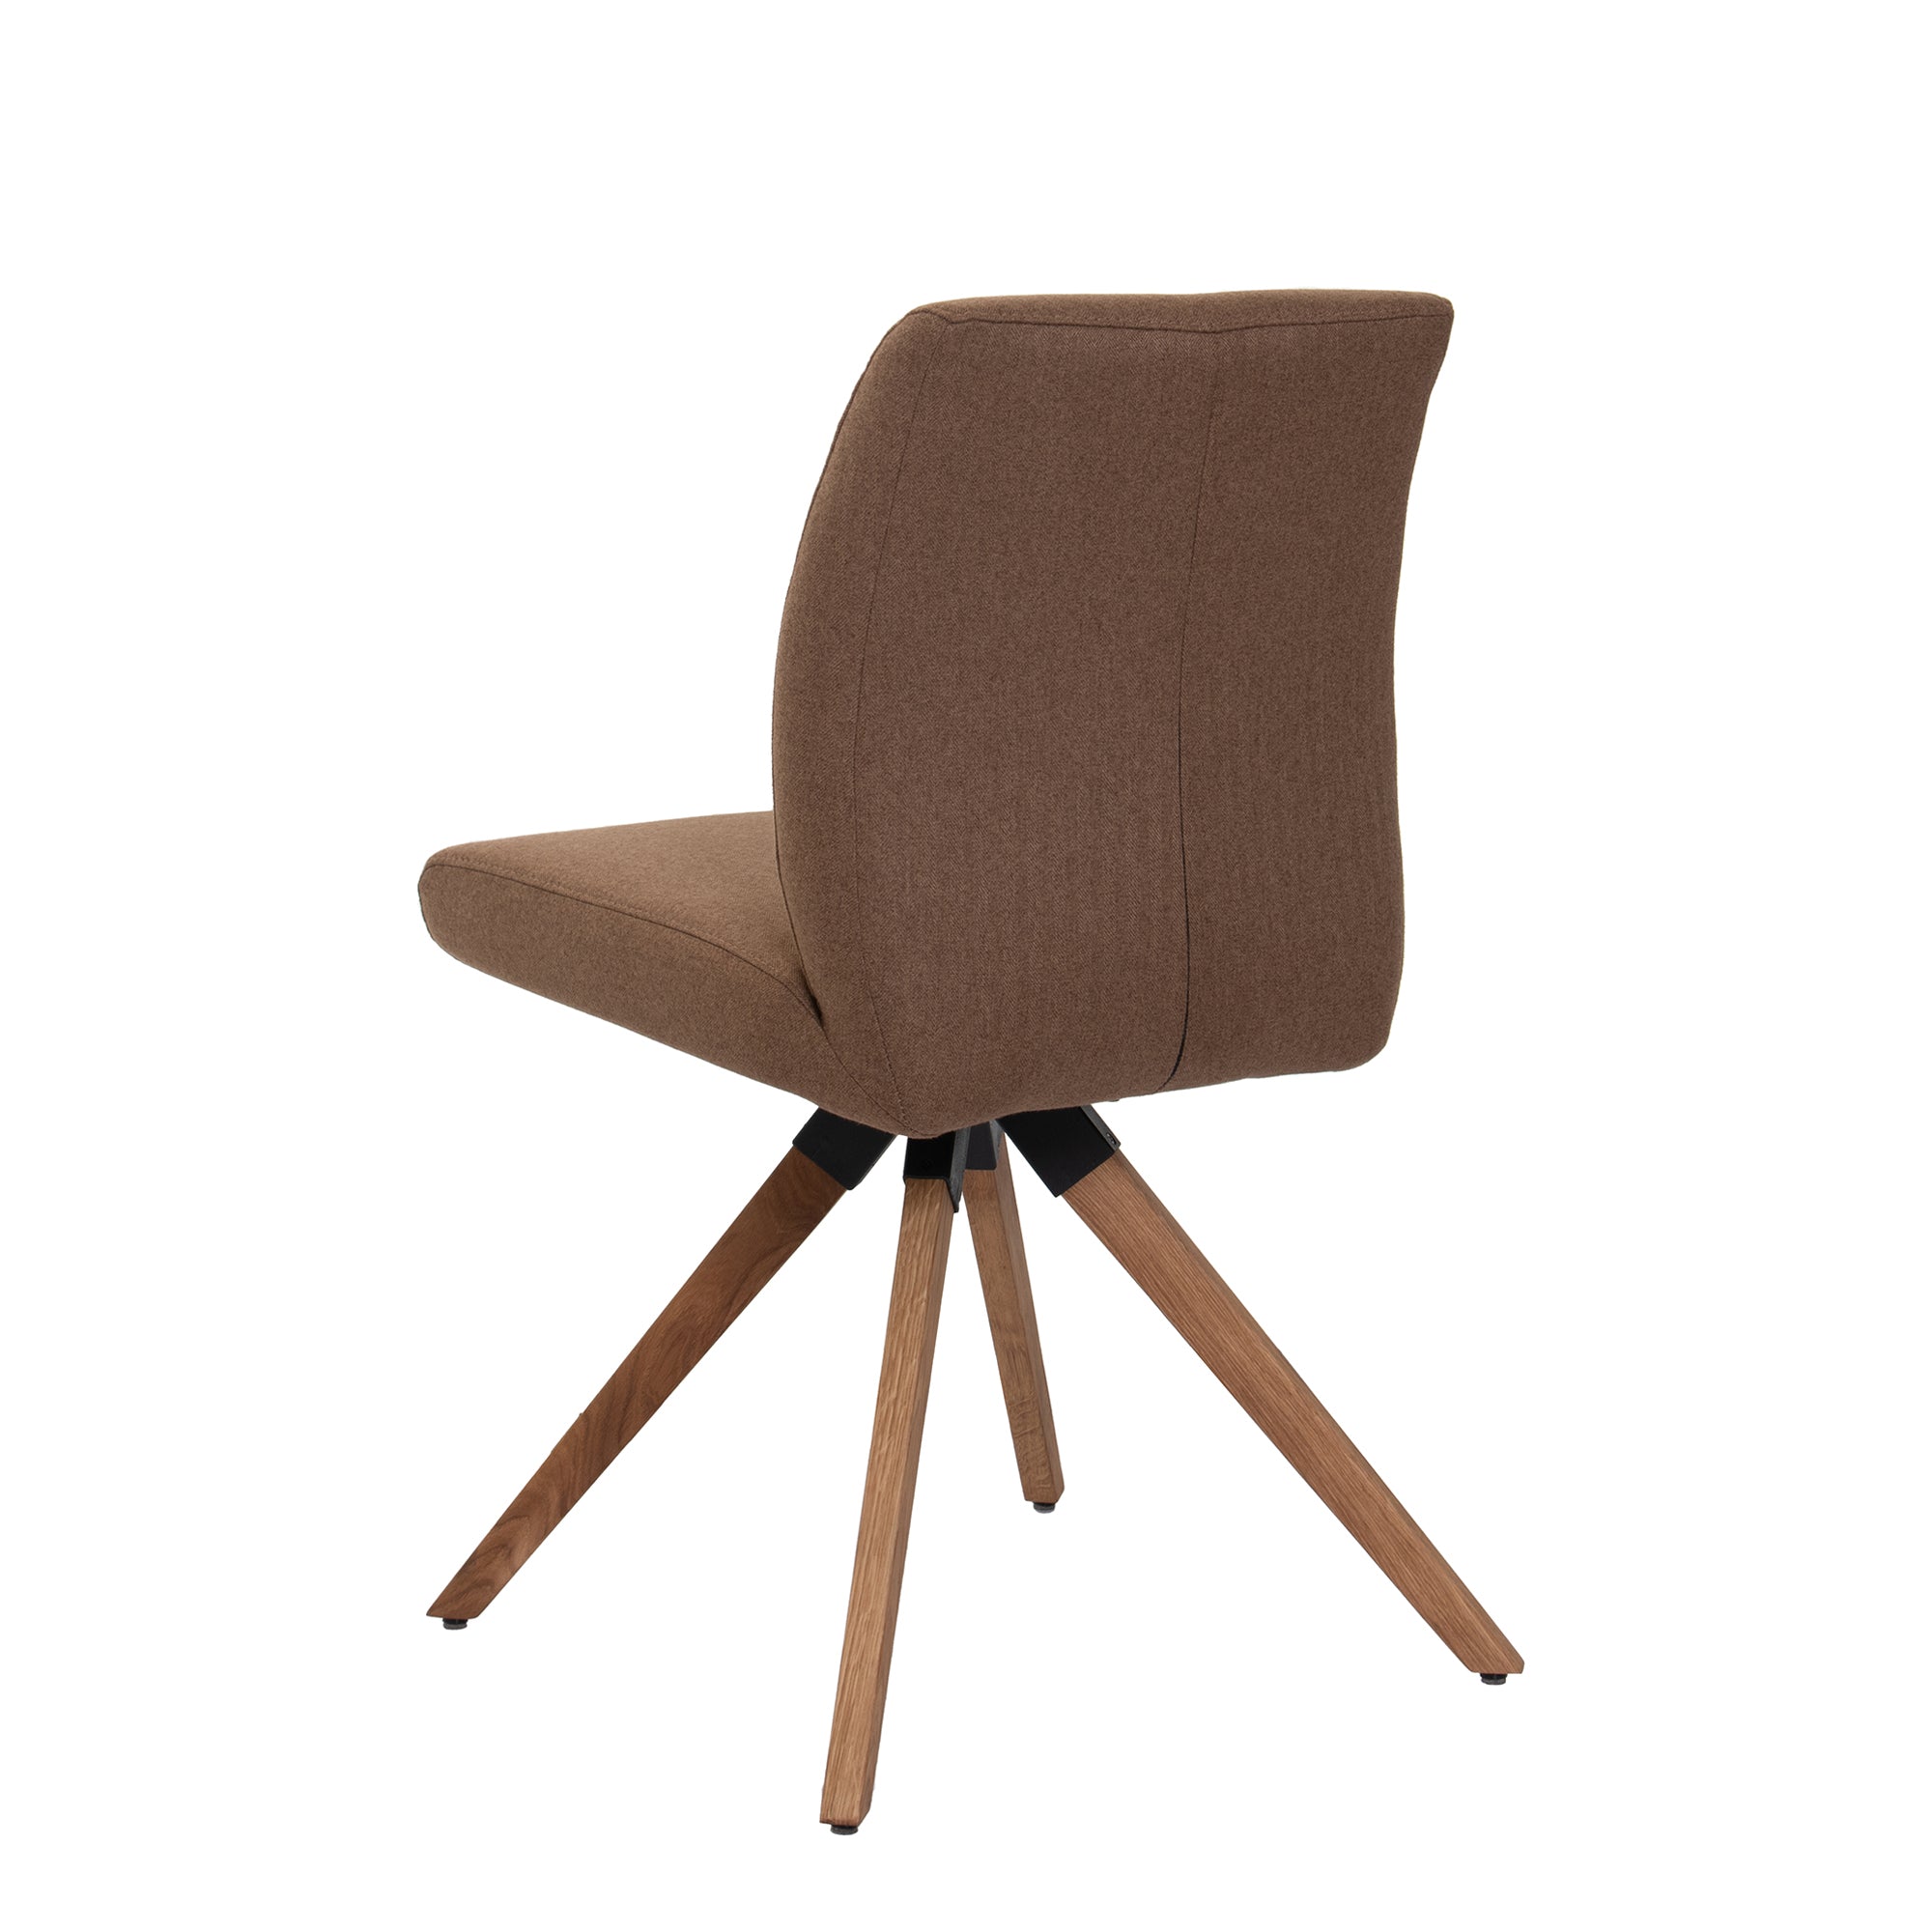 Chair With 'C' Wooden Leg In Group 1